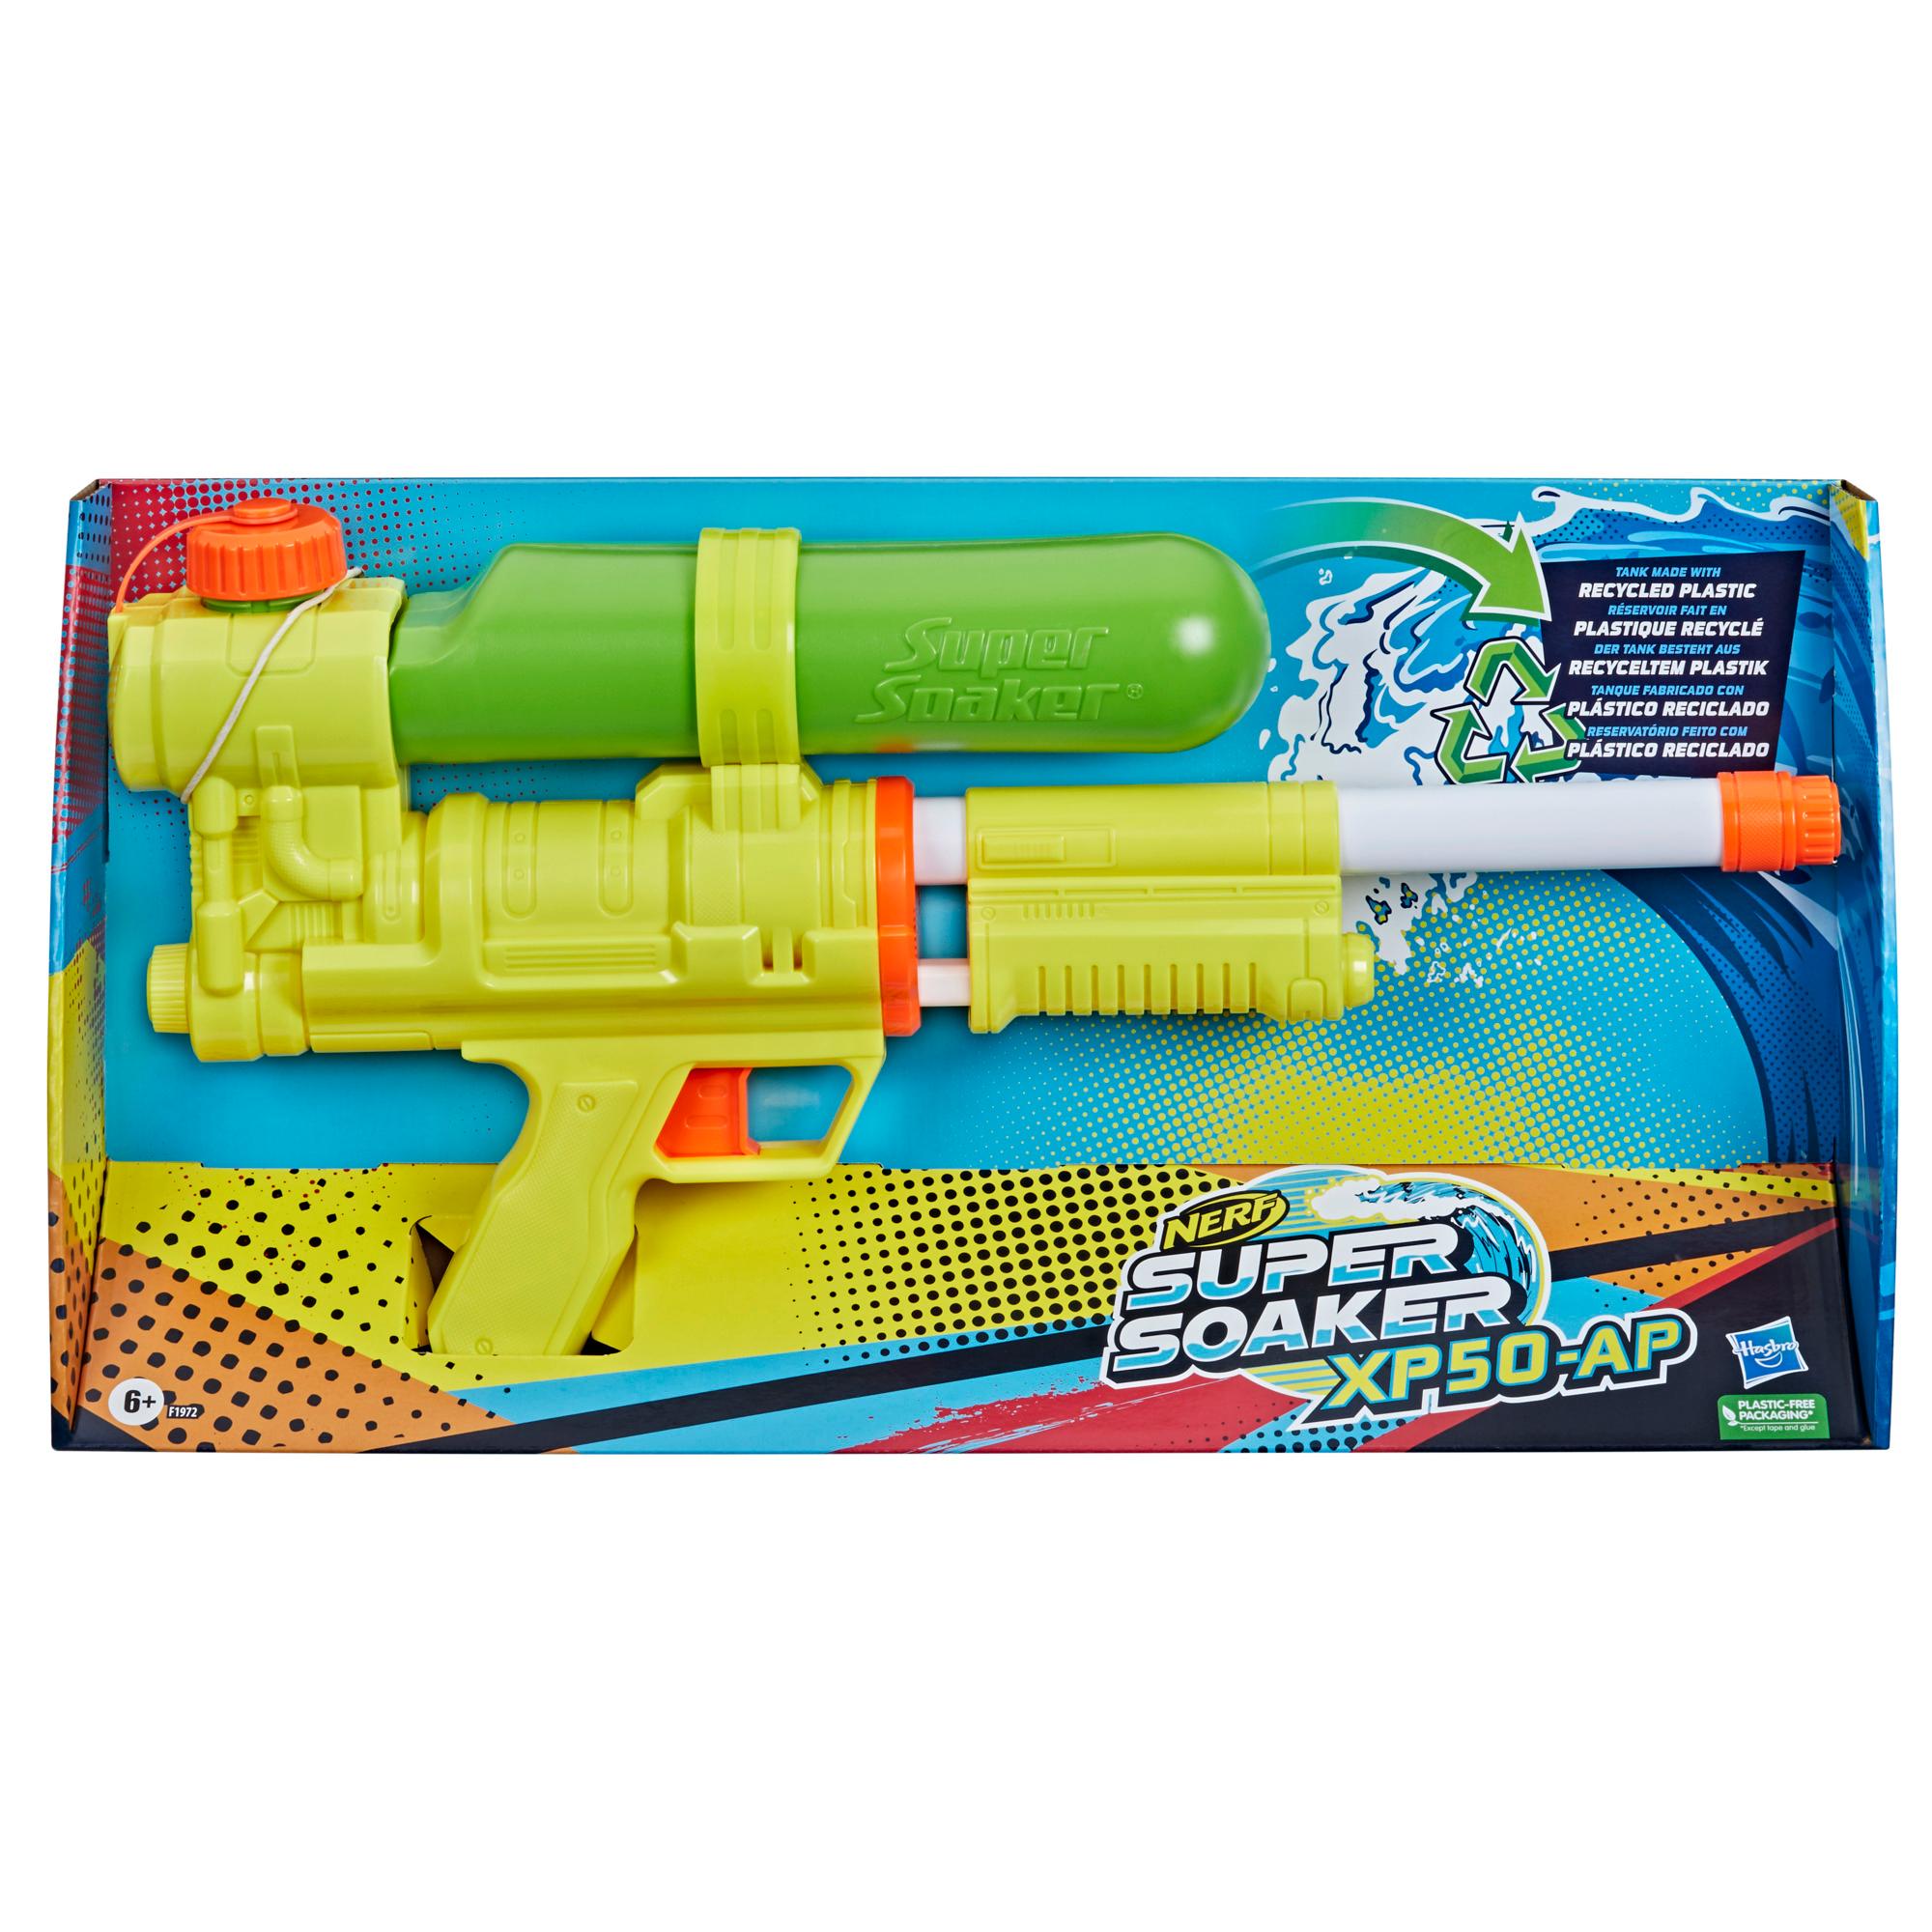 Nerf Super Soaker XP50-AP Water Blaster, Tank Made With Recycled Plastic, Air-Pressurized Continuous Water Blast